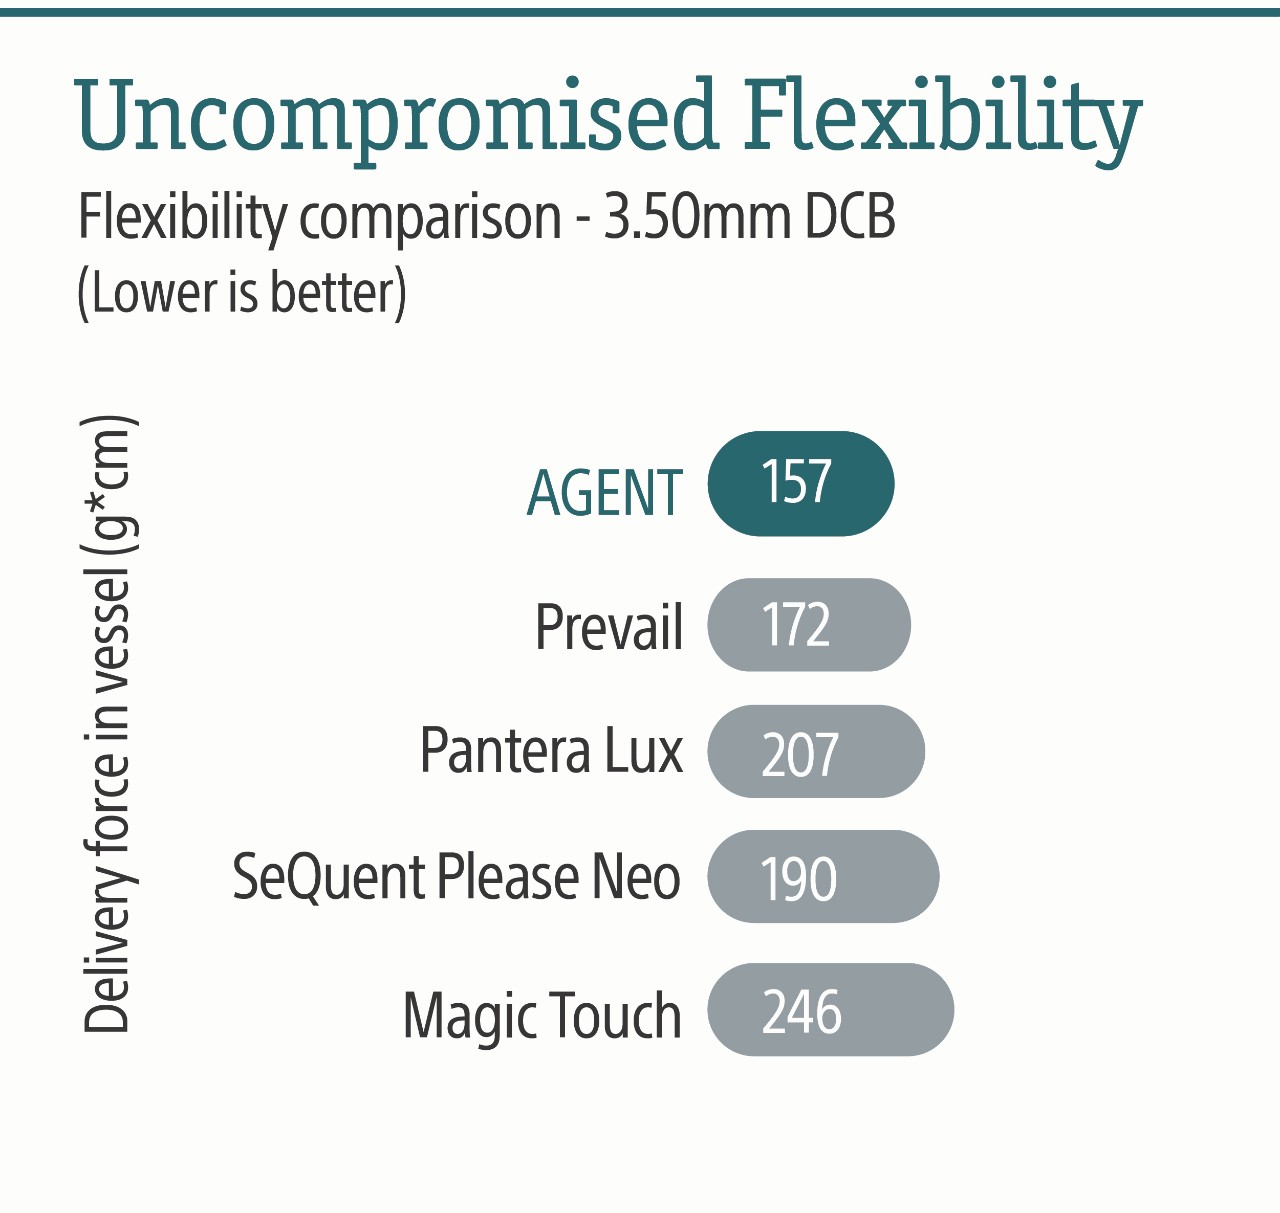 Uncompromised Flexibility